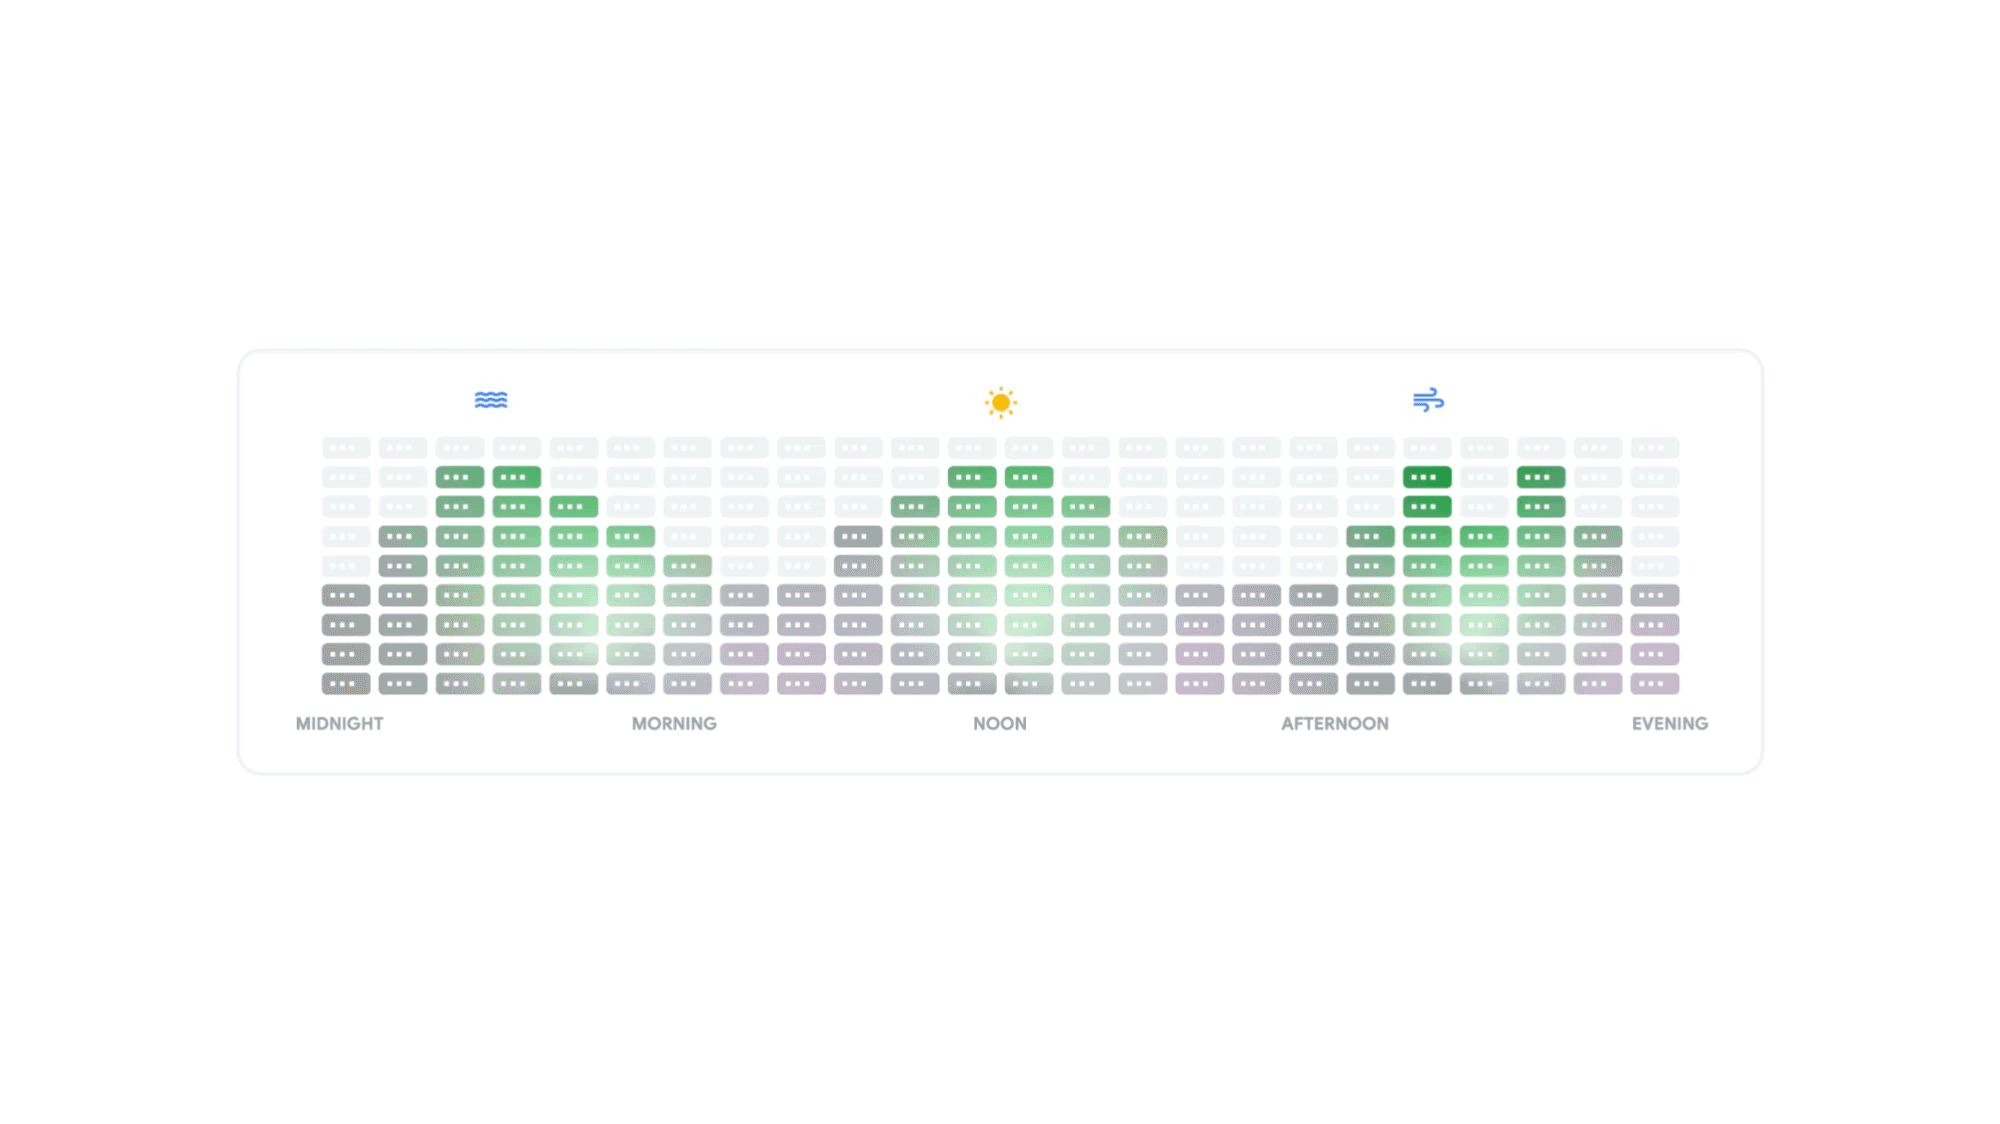 Animated GIF illustrating how Google shifts compute tasks between data centers to better use carbon-free energy, and hence minimize the fleet’s carbon footprint.